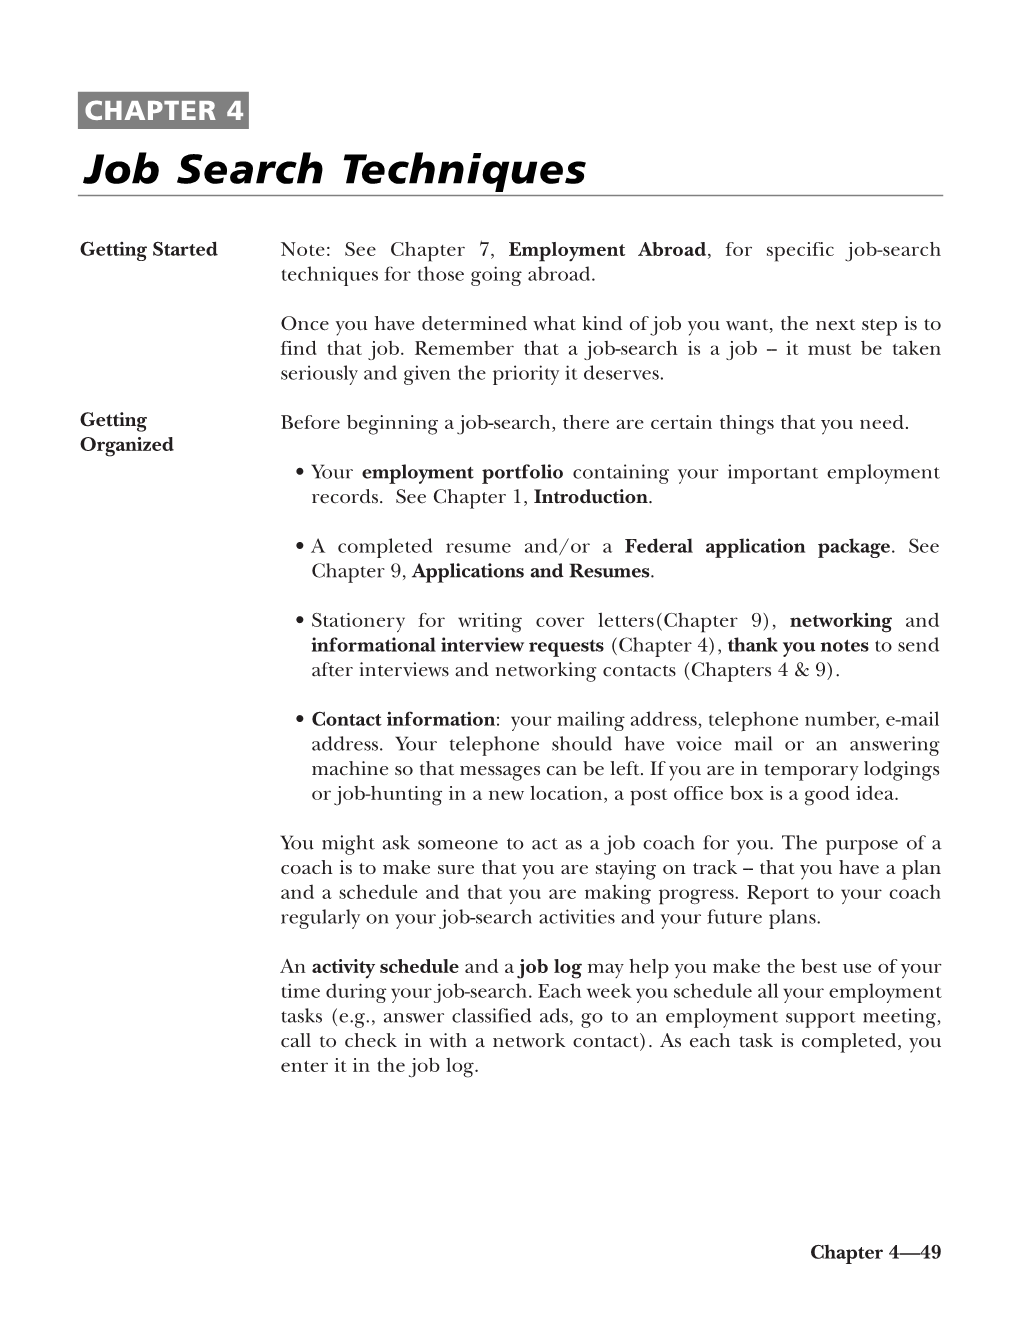 CHAPTER 4 Job Search Techniques